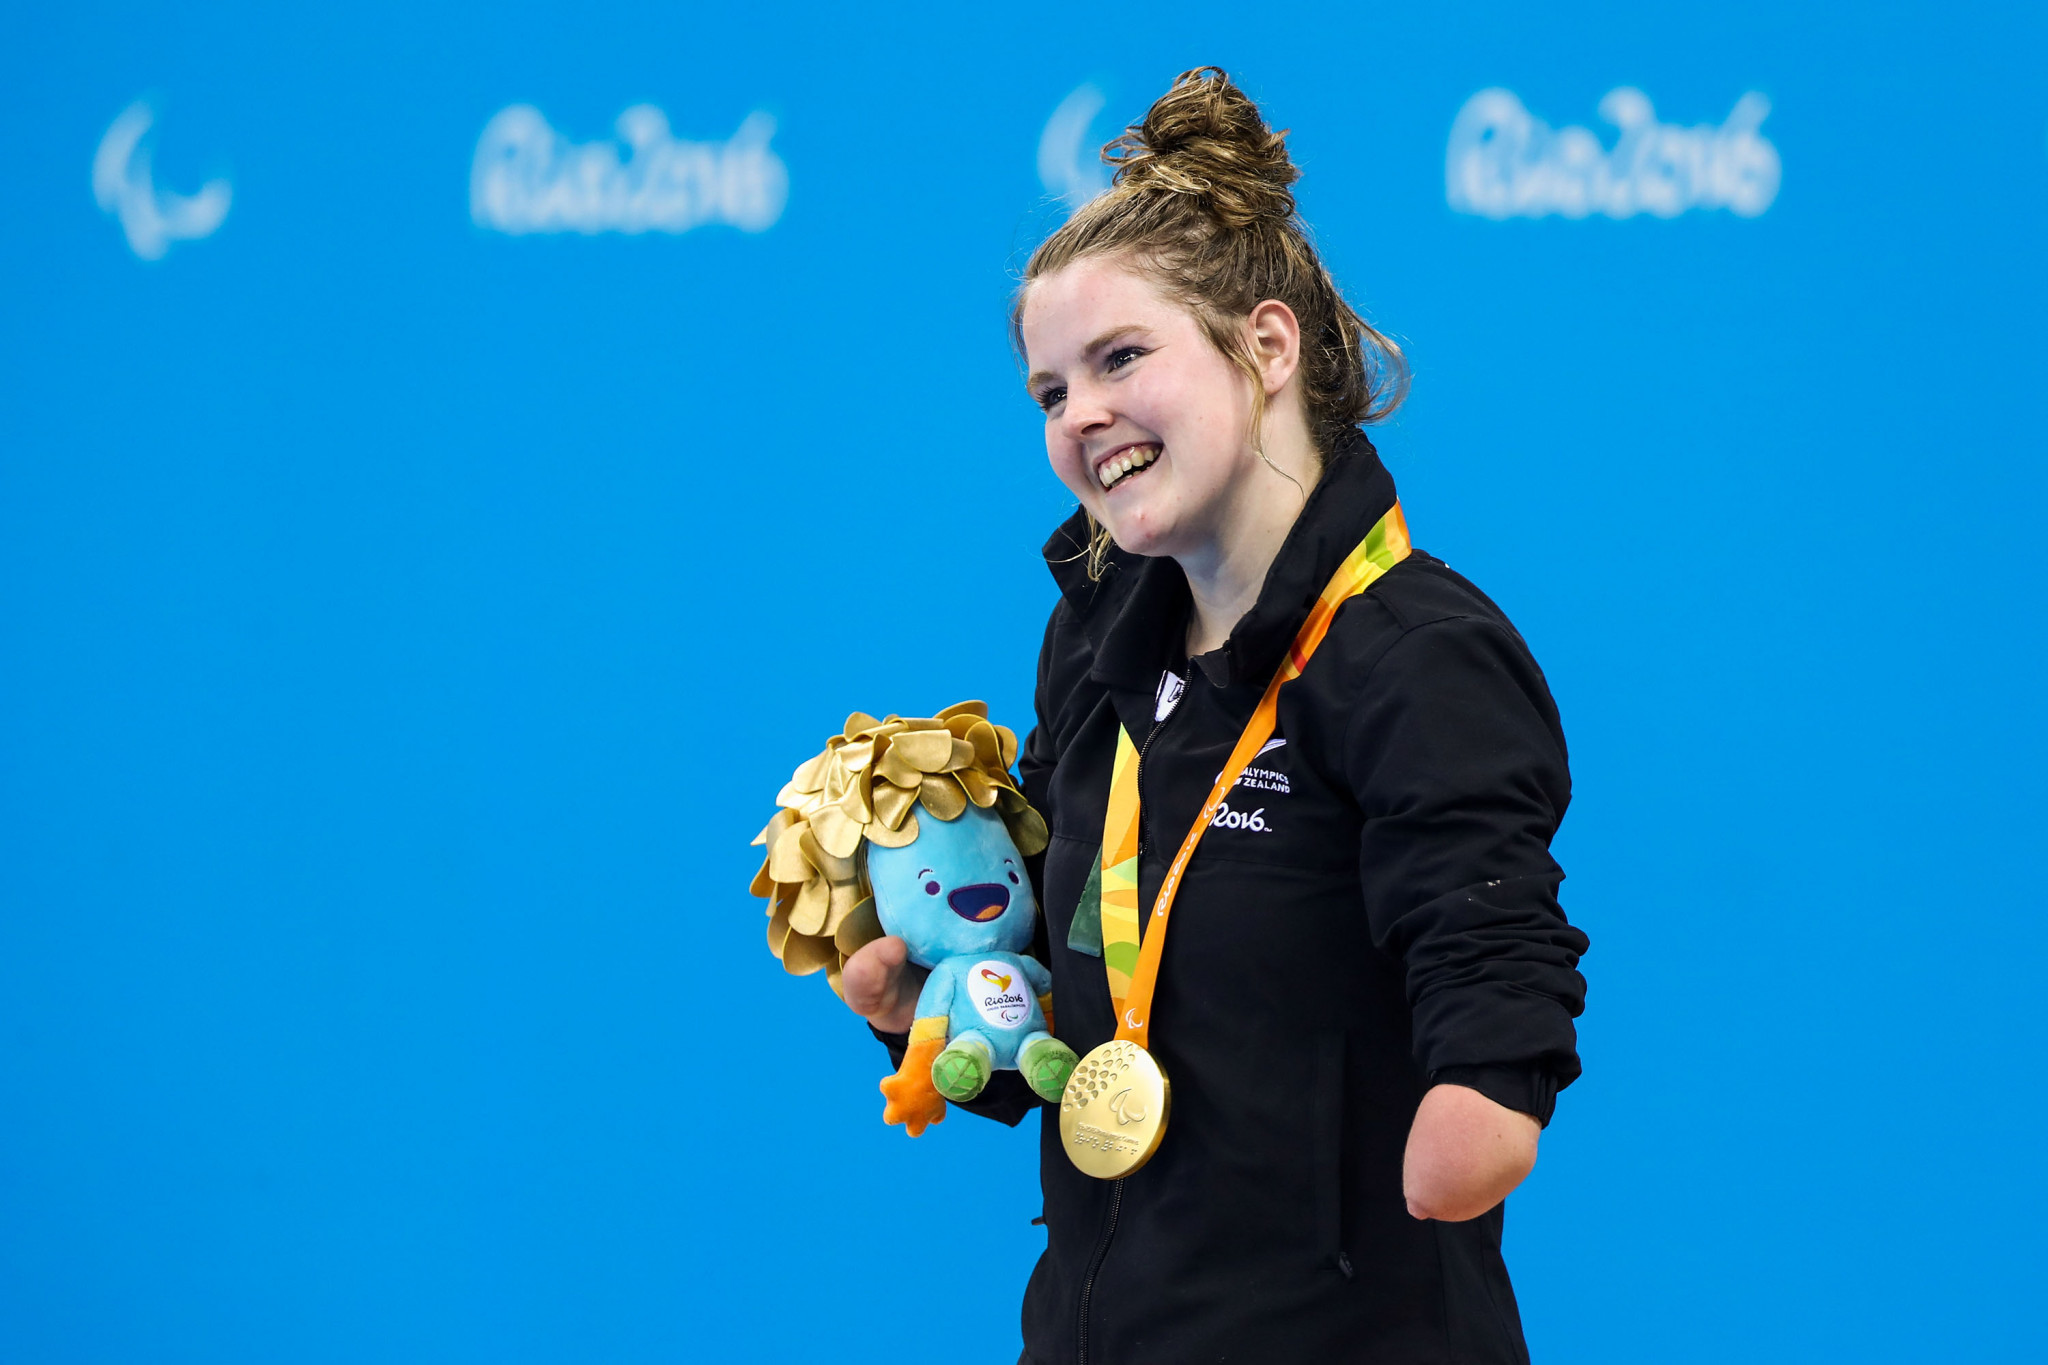 Nikita Howarth became New Zealand's youngest ever Paralympian, selected for London 2012 at the age of 13 ©Paralympics New Zealand